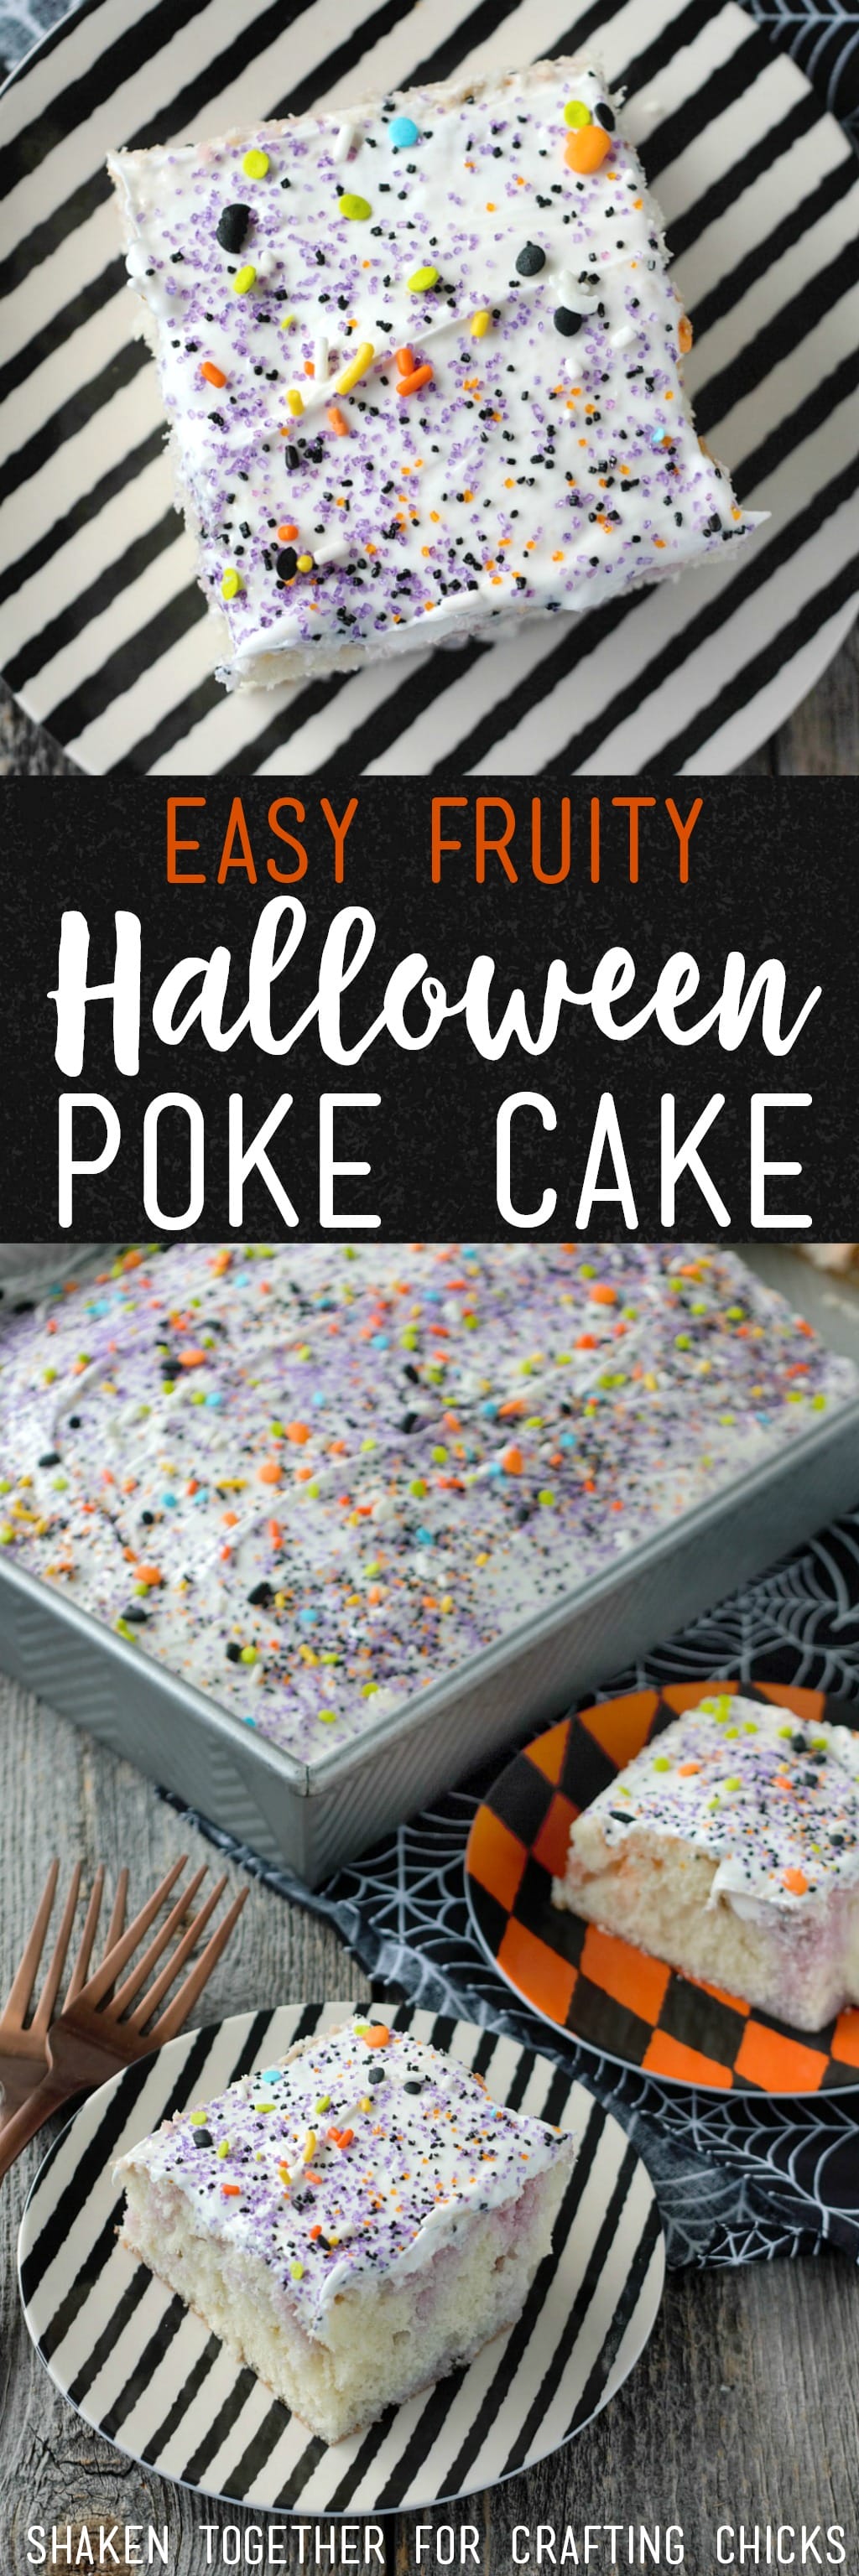 With fruity swirls of purple and orange in a soft white cake, this Easy Fruity Halloween Poke Cake is a spooky sweet treat!